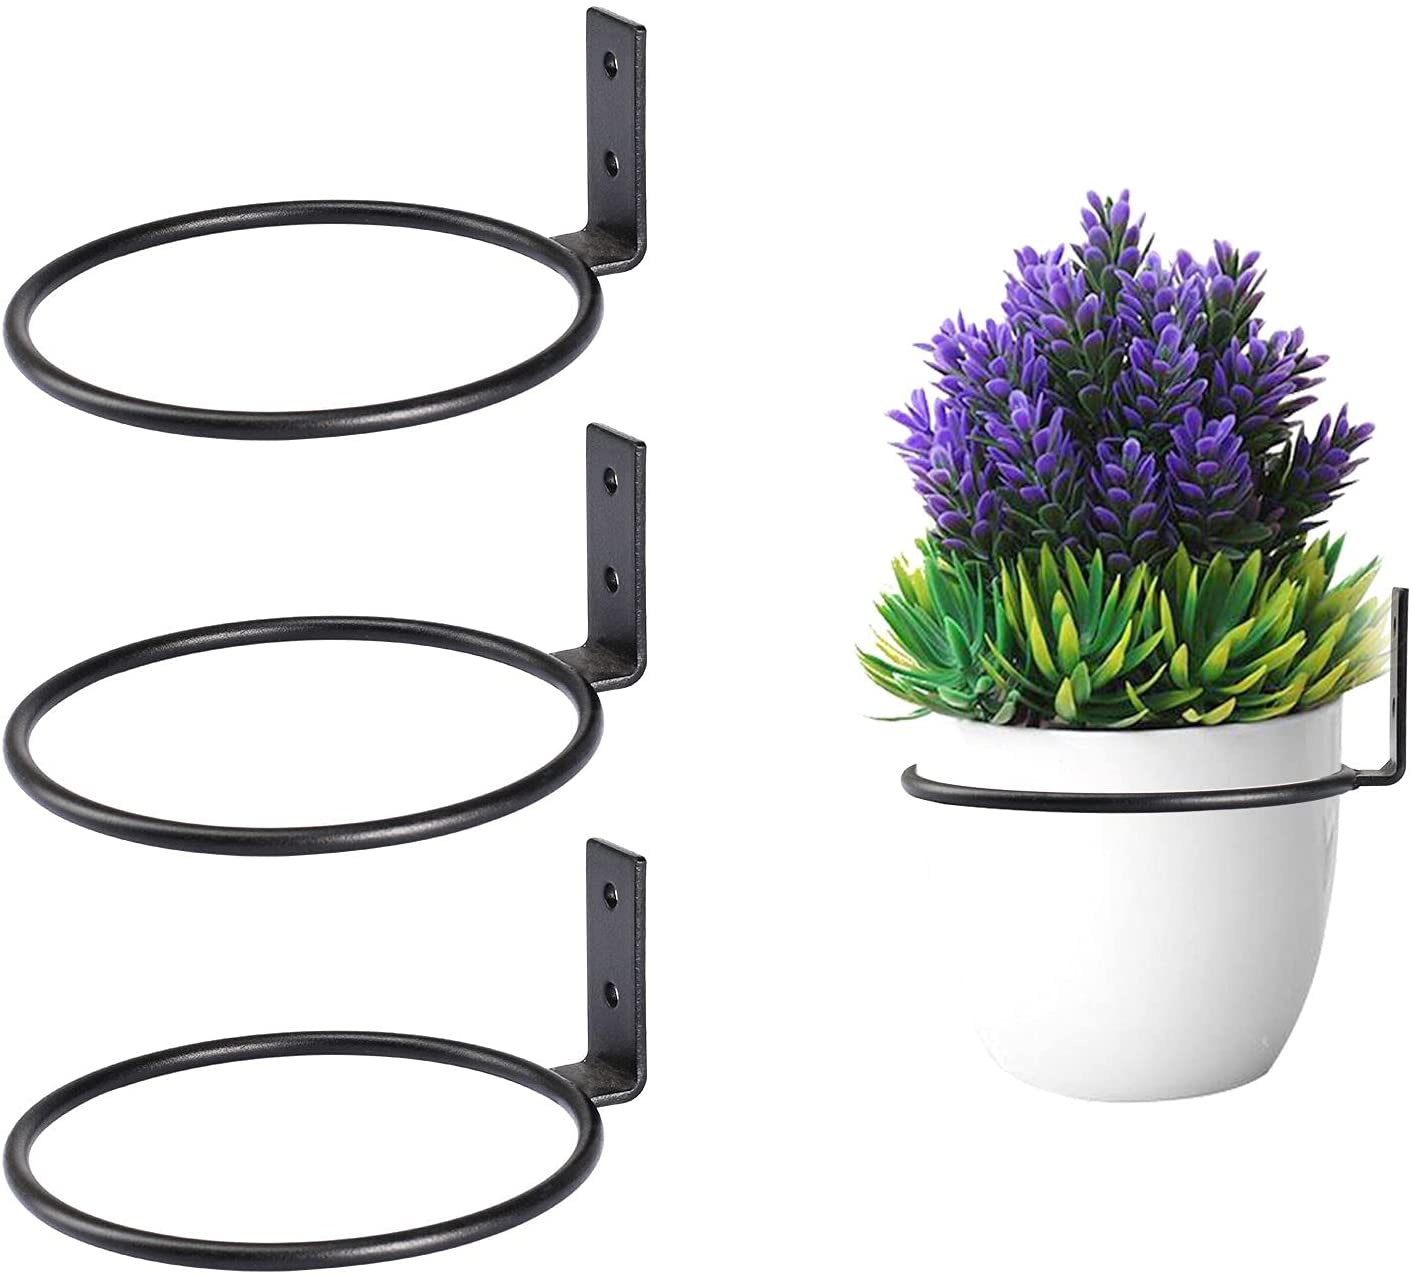  20 Pcs Flower Pot Holder Ring Wall Mounted Plant